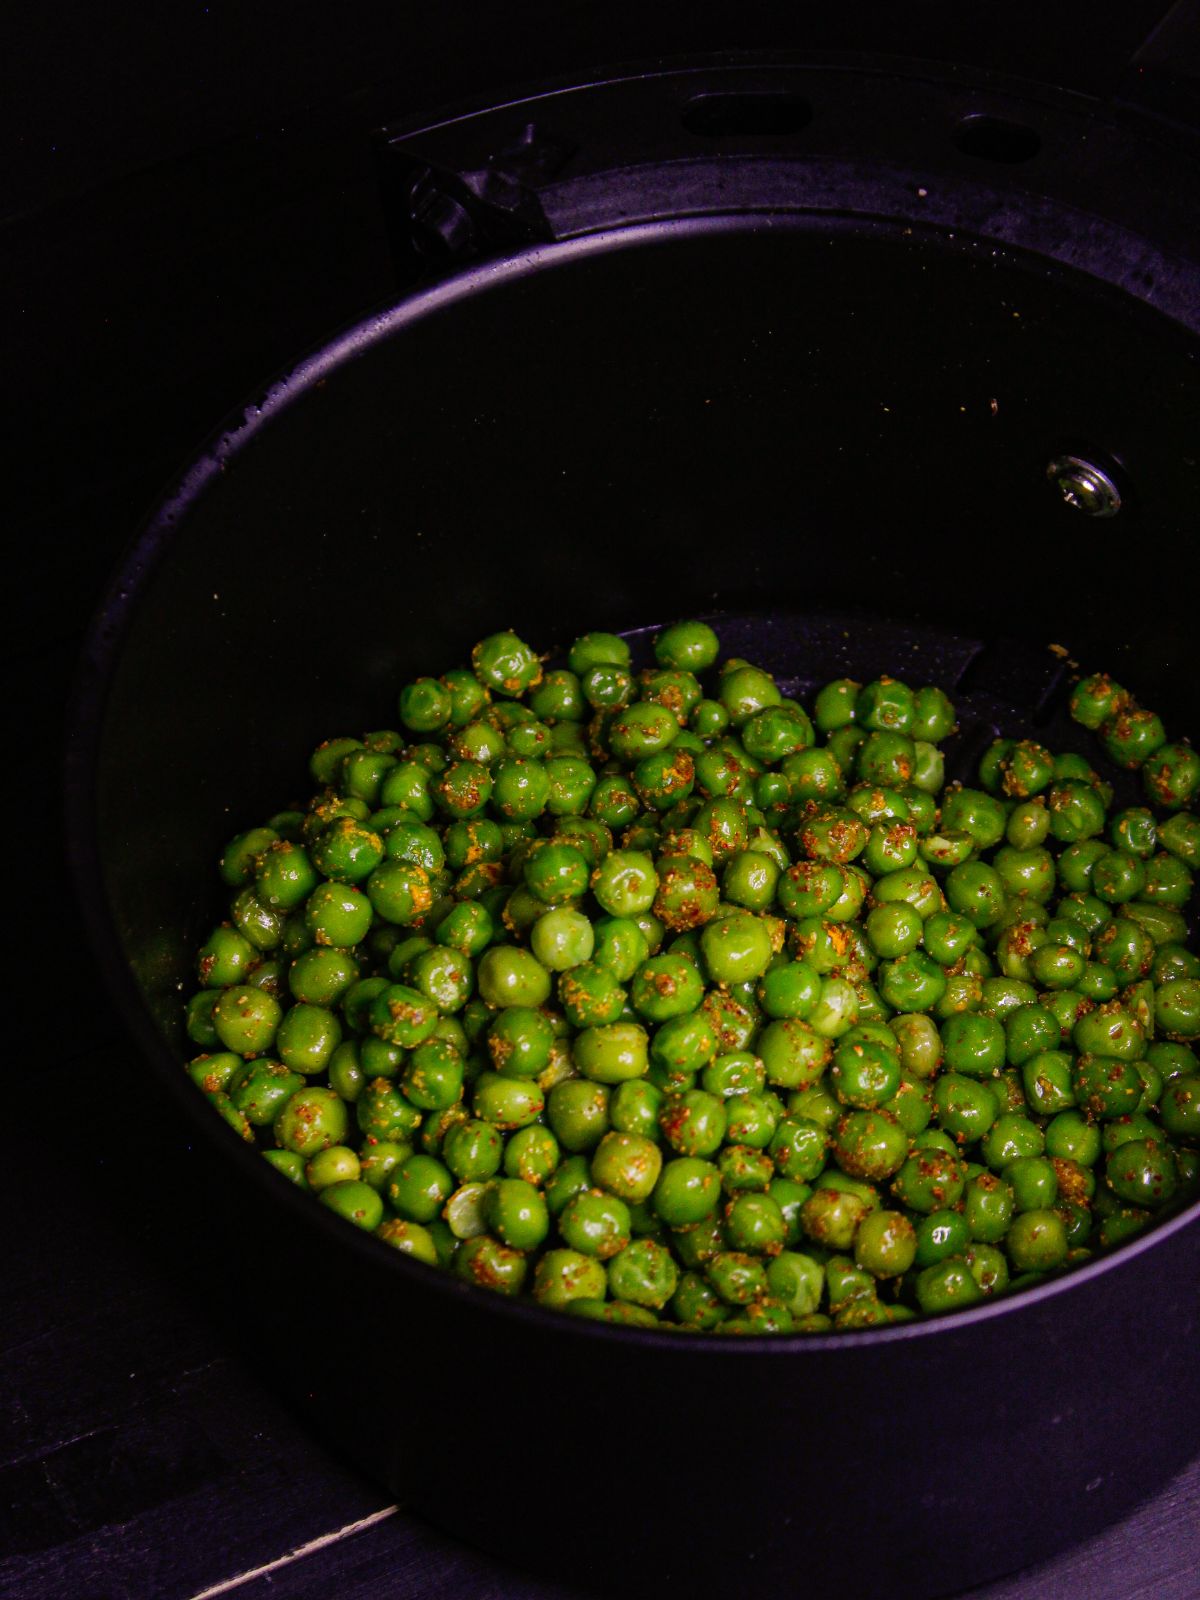 Transfer the peas into the air fryer basket and spray some oil over it 